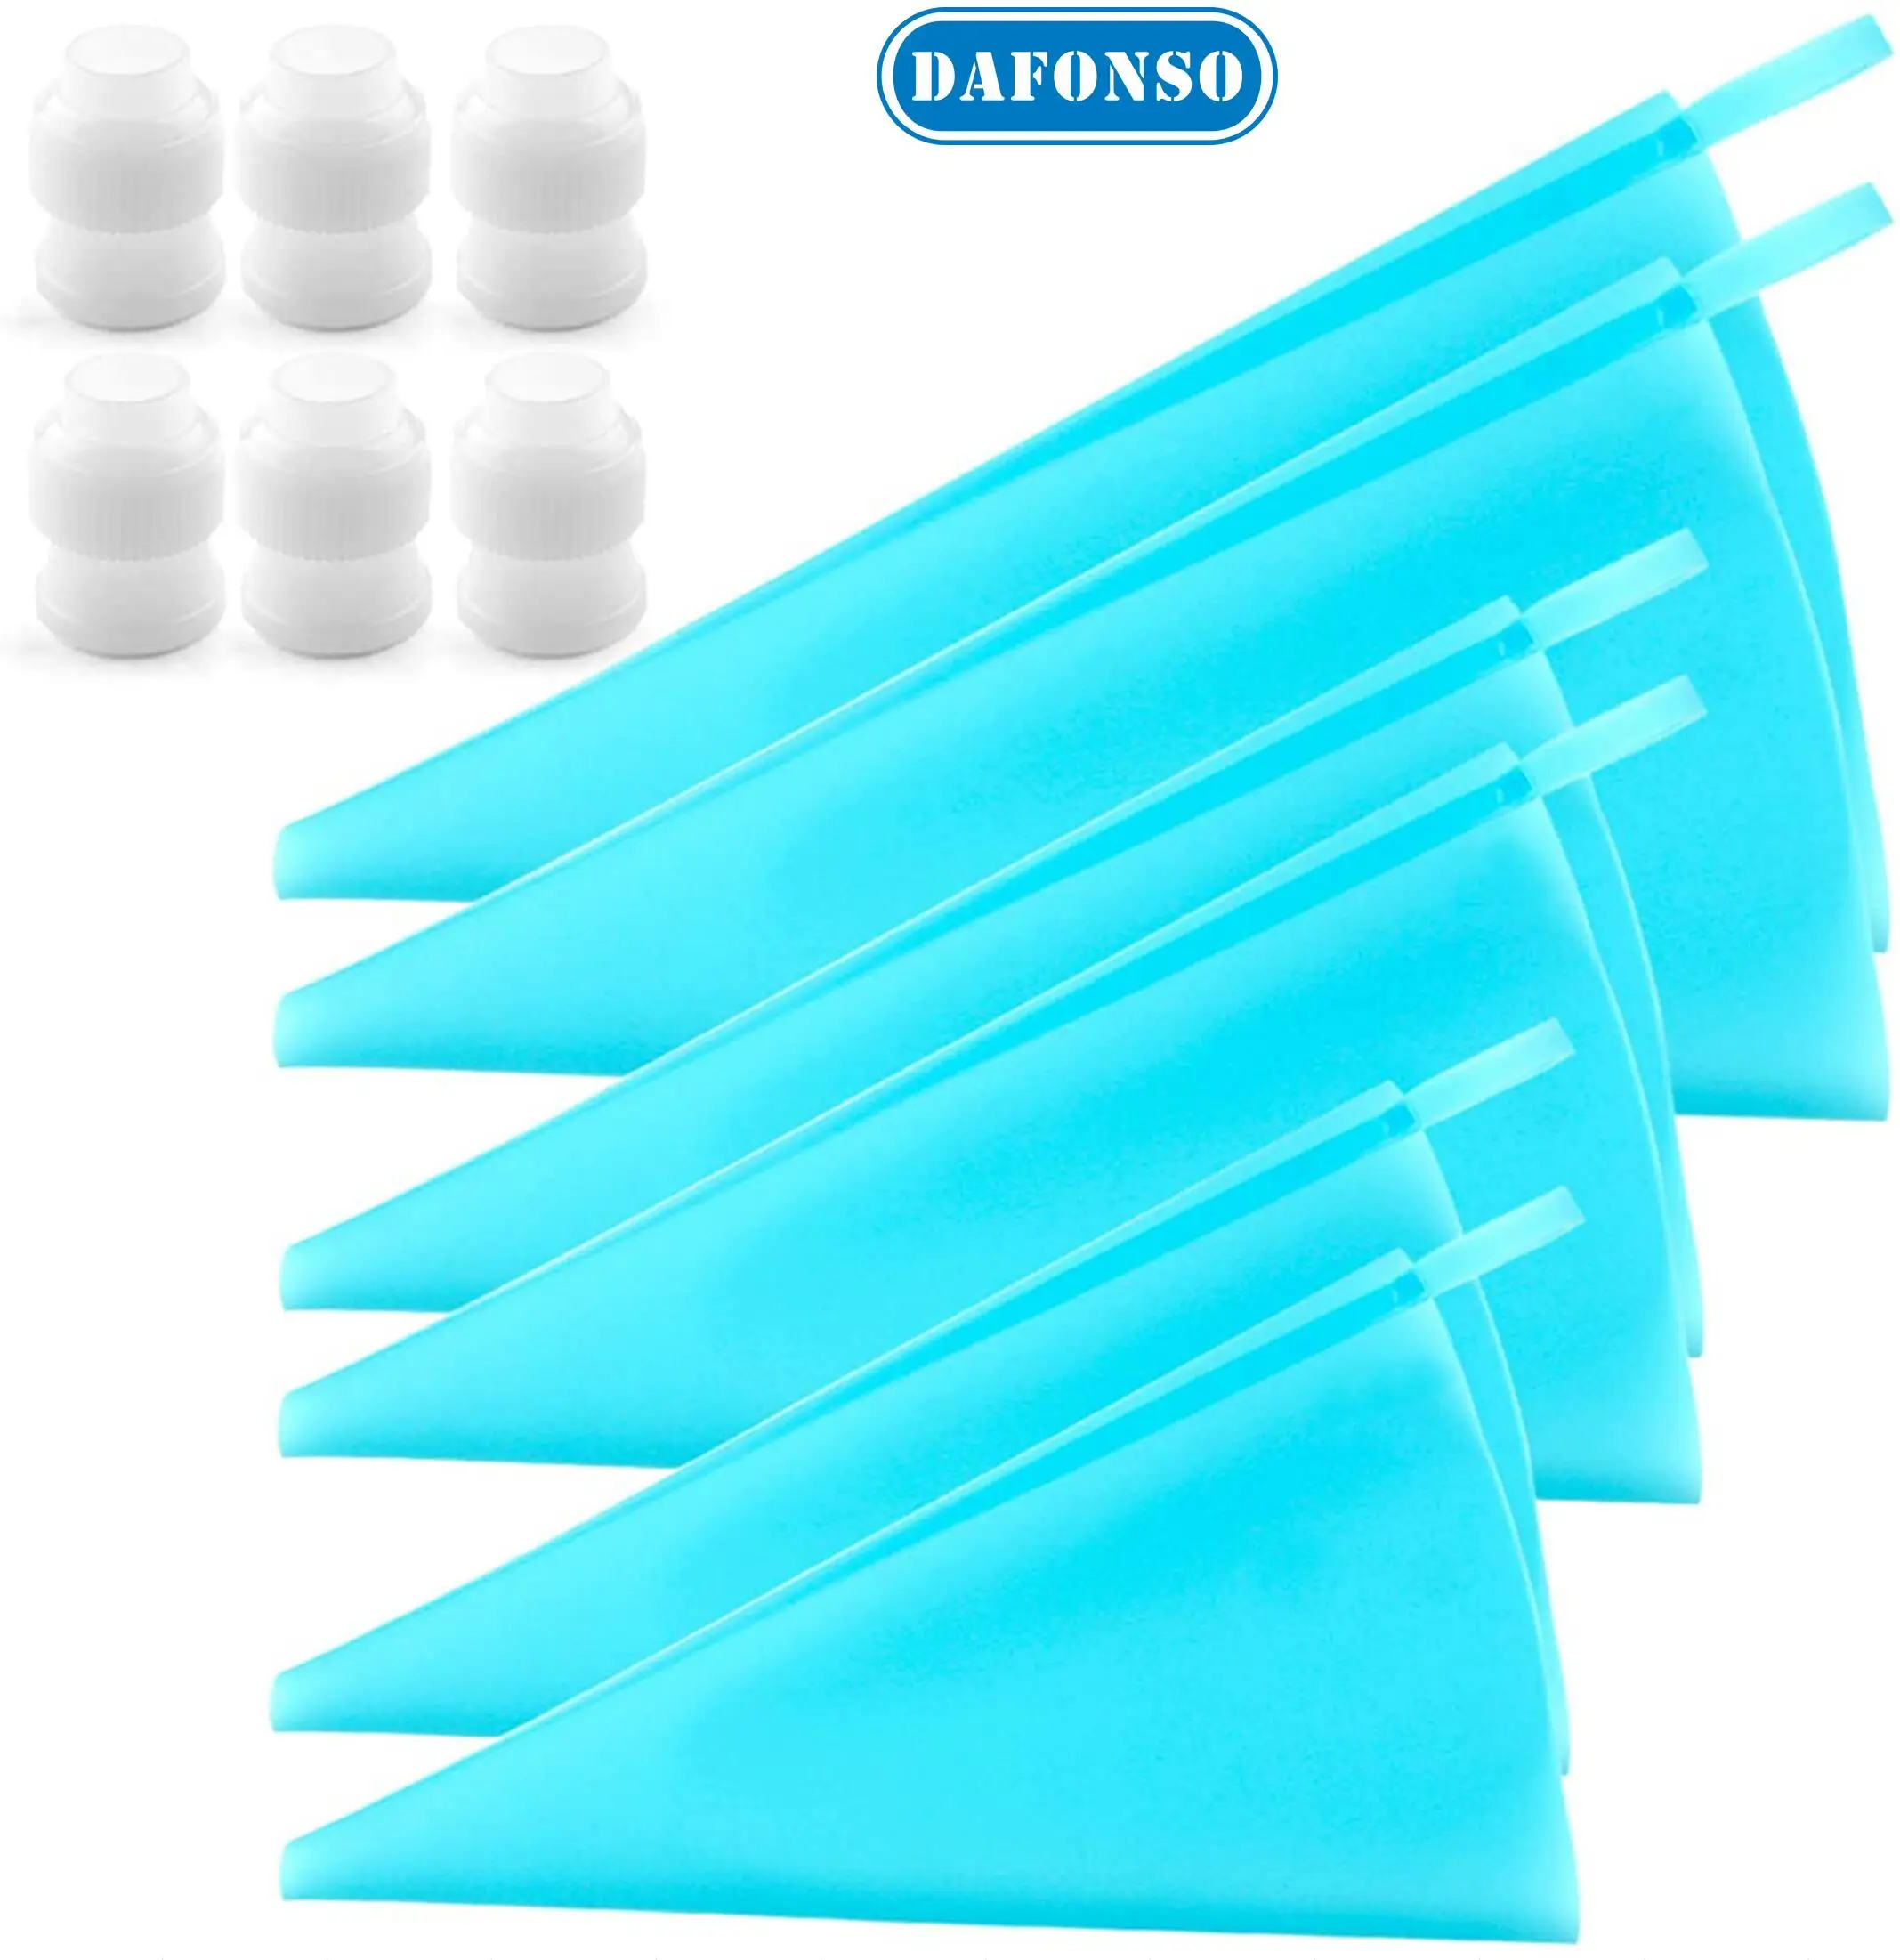 

DAFONSO Silicone Pastry Bags 3 Sizes Reusable Icing Piping Bags Baking Cookie Cake Decorating Bags, Blue/orange/white